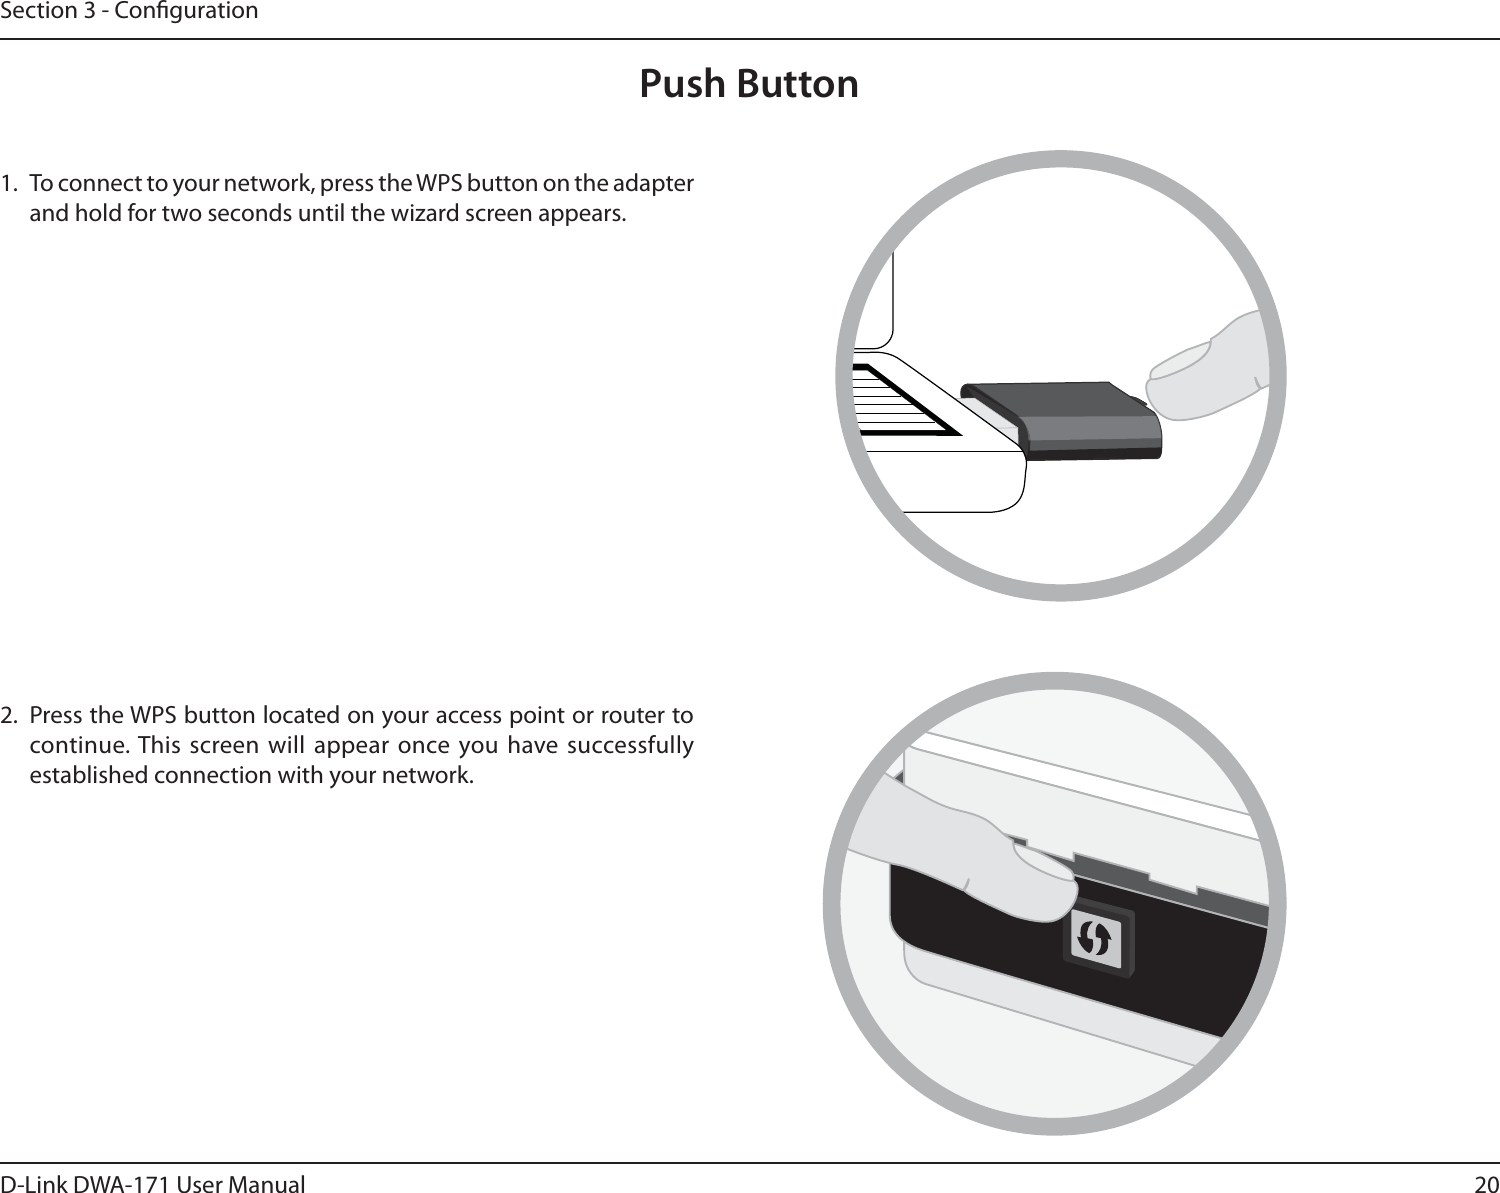 20D-Link DWA-171 User ManualSection 3 - CongurationPush Button1.  To connect to your network, press the WPS button on the adapter and hold for two seconds until the wizard screen appears.2.  Press the WPS button located on your access point or router to continue. This screen will appear once you have successfully established connection with your network. 